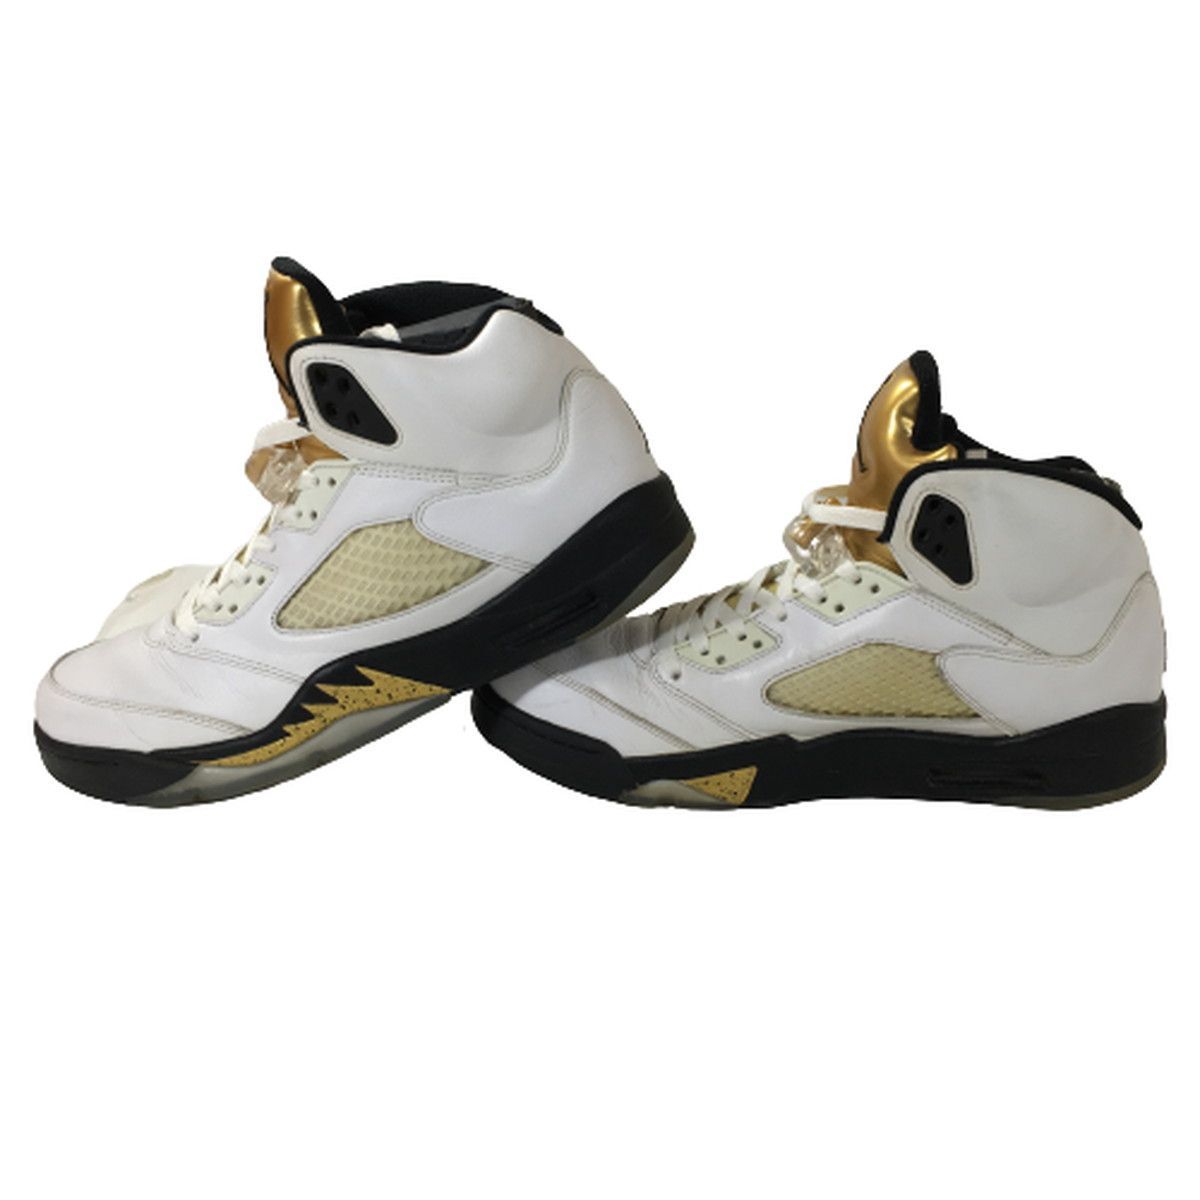 AJ5 gold coin 28 2016 本日限定値下げ